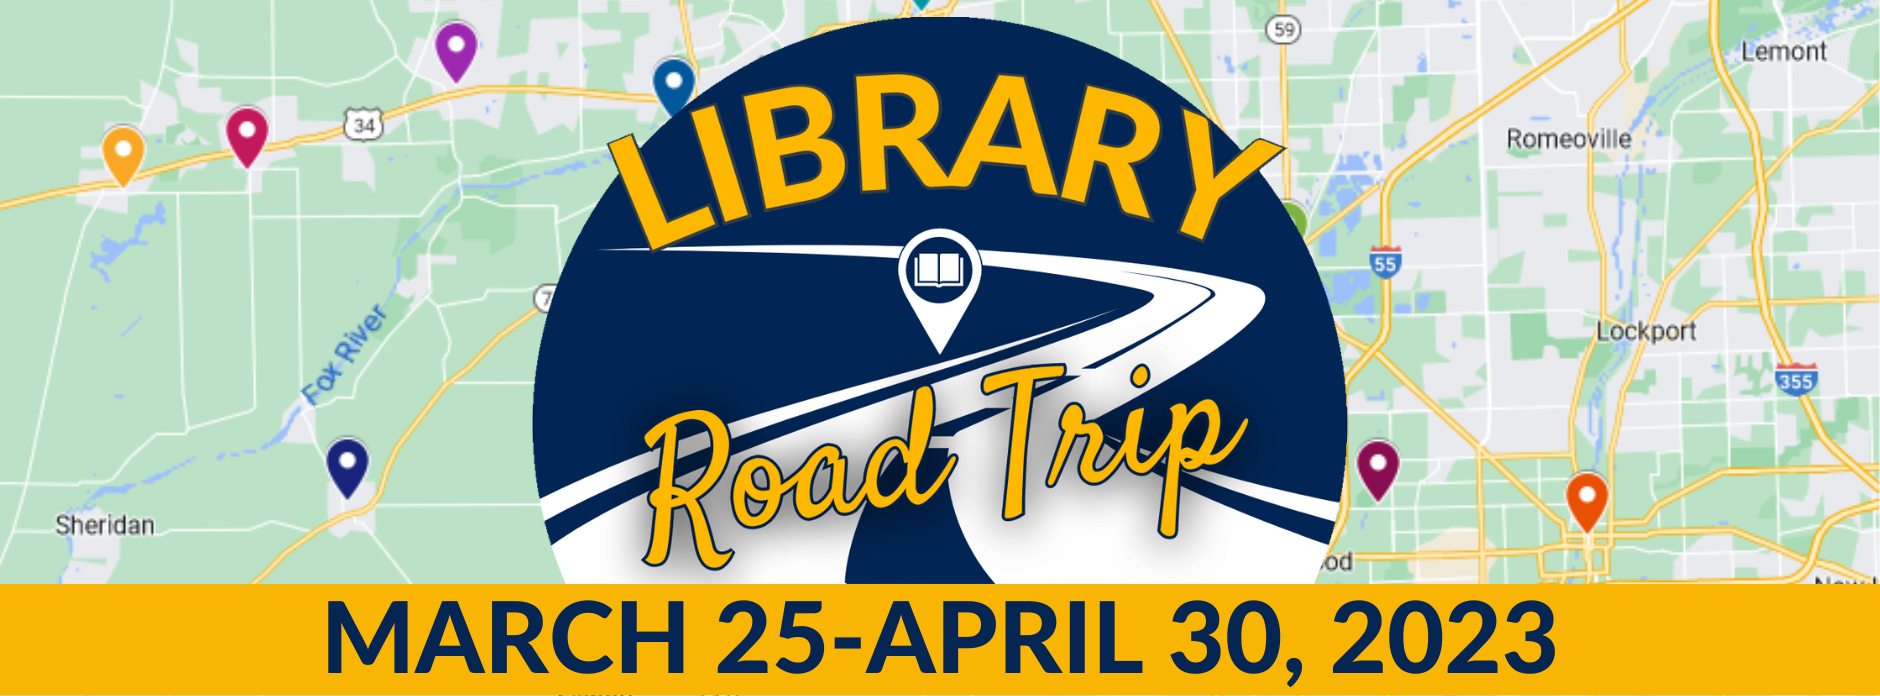 Library Road Trip